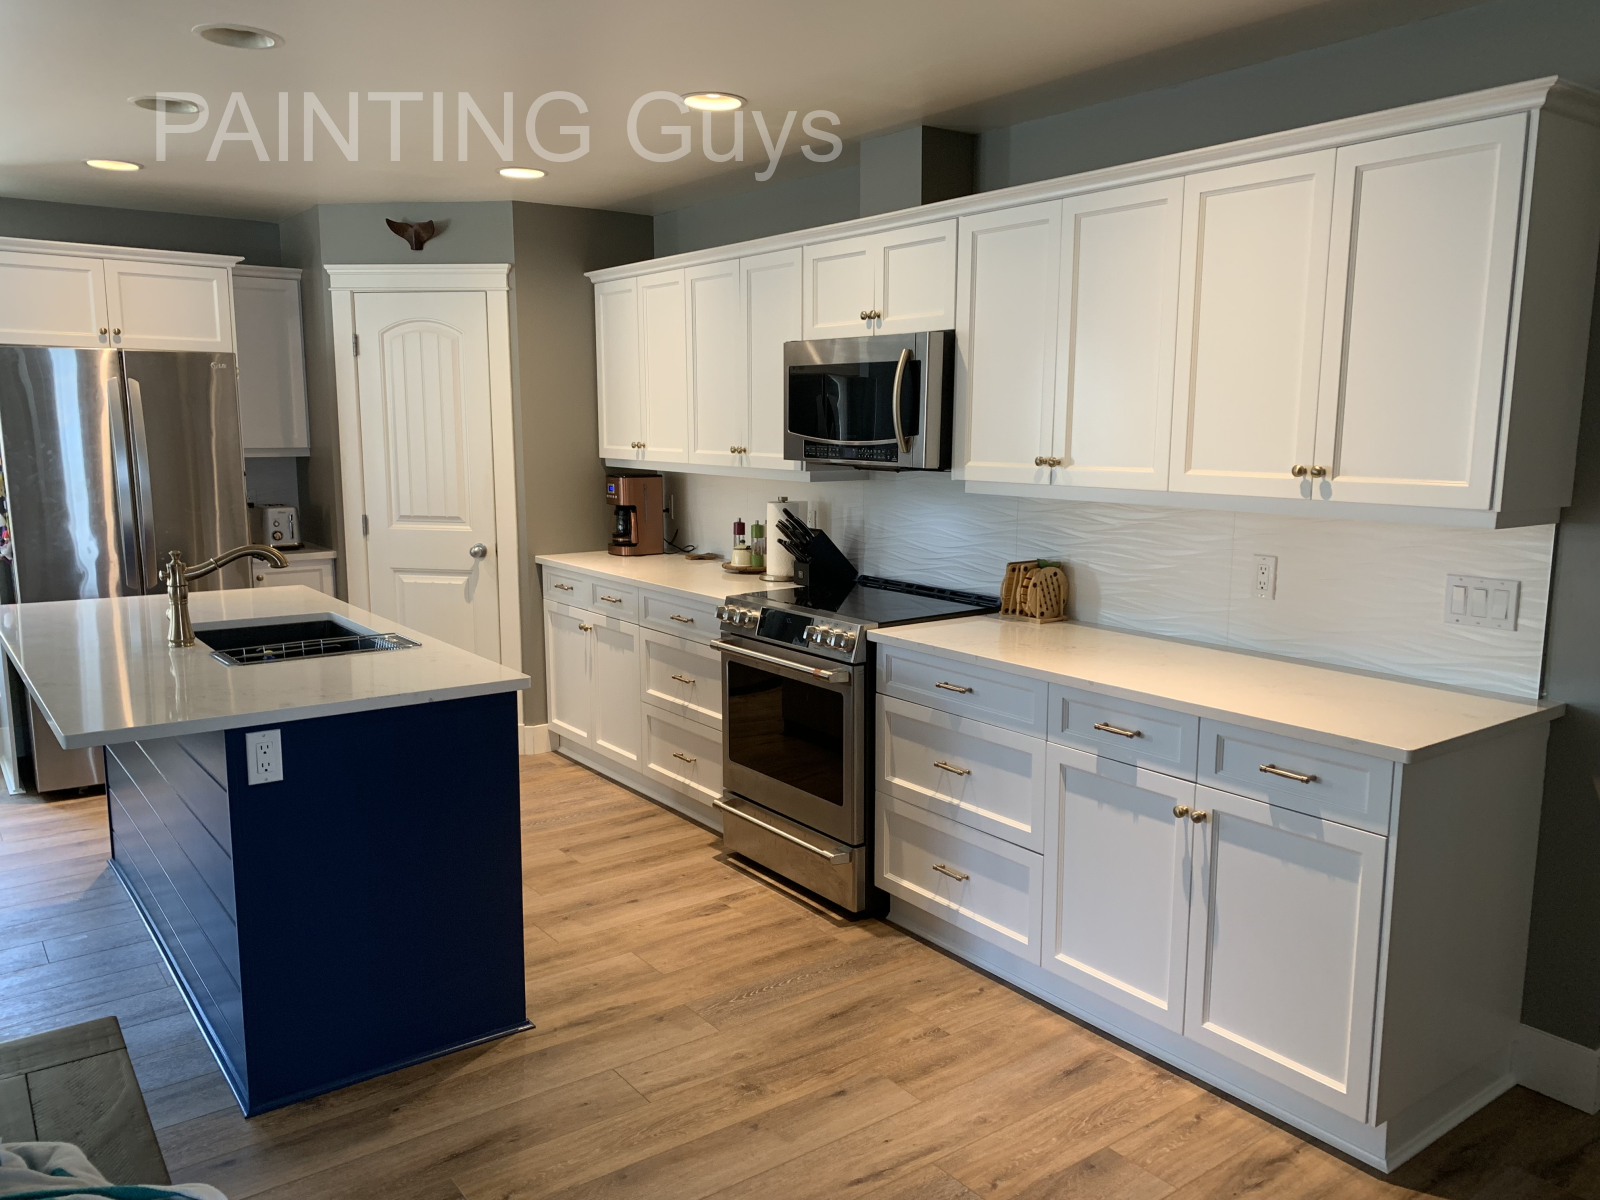 Two-tone kitchen cabinets PAINTING Guys